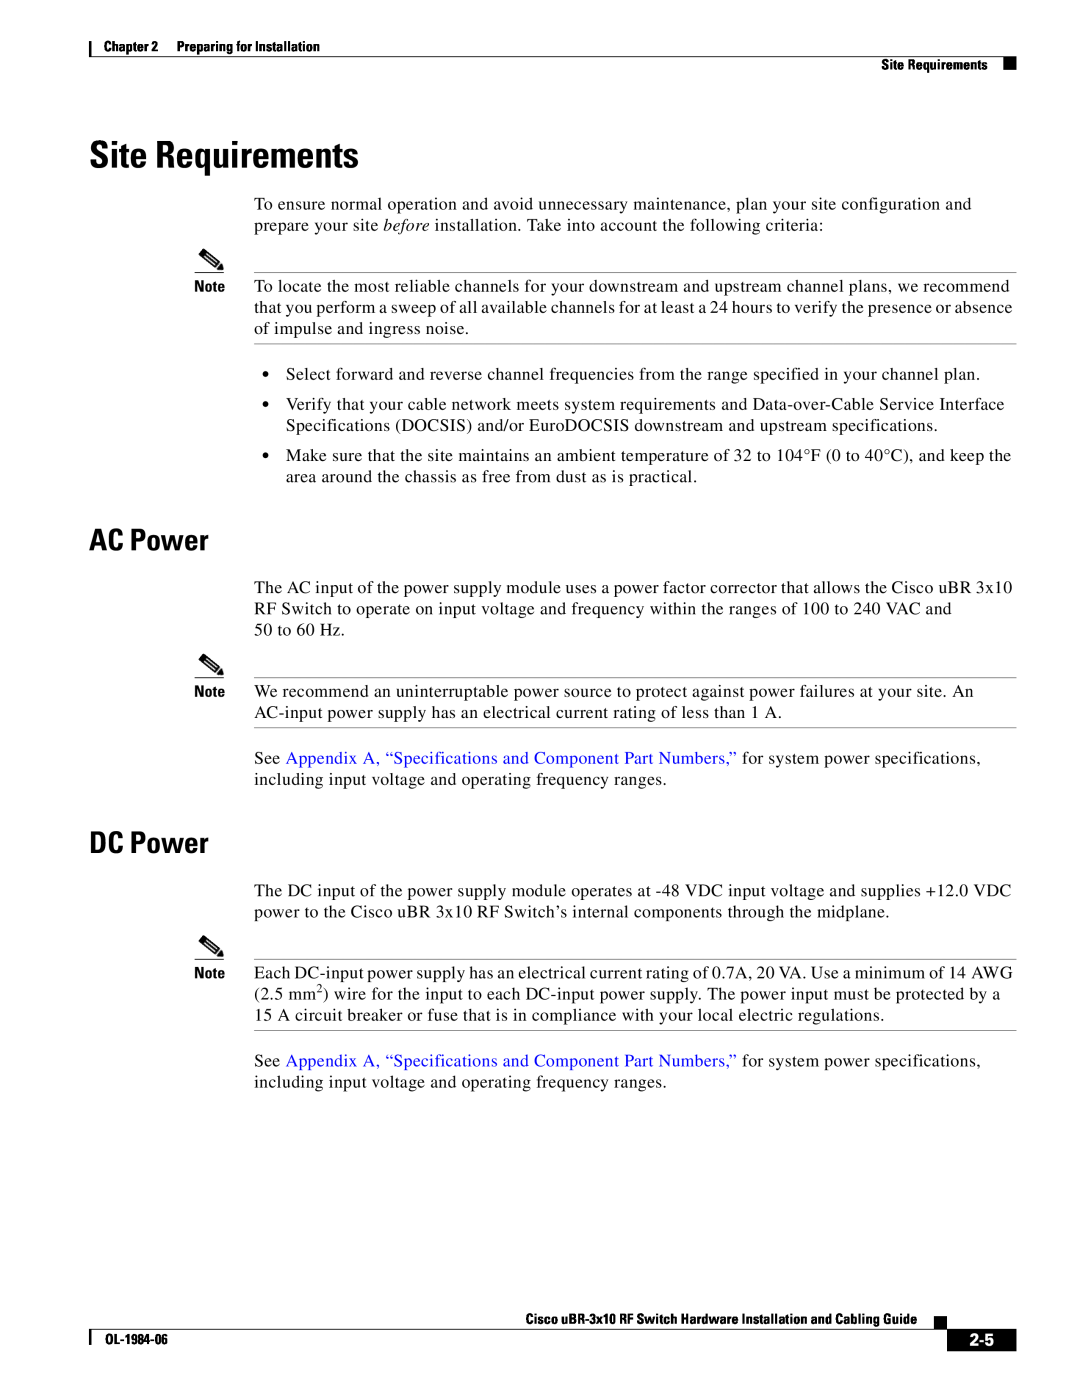 Cisco Systems UBR-3X10 manual Site Requirements, AC Power, DC Power 